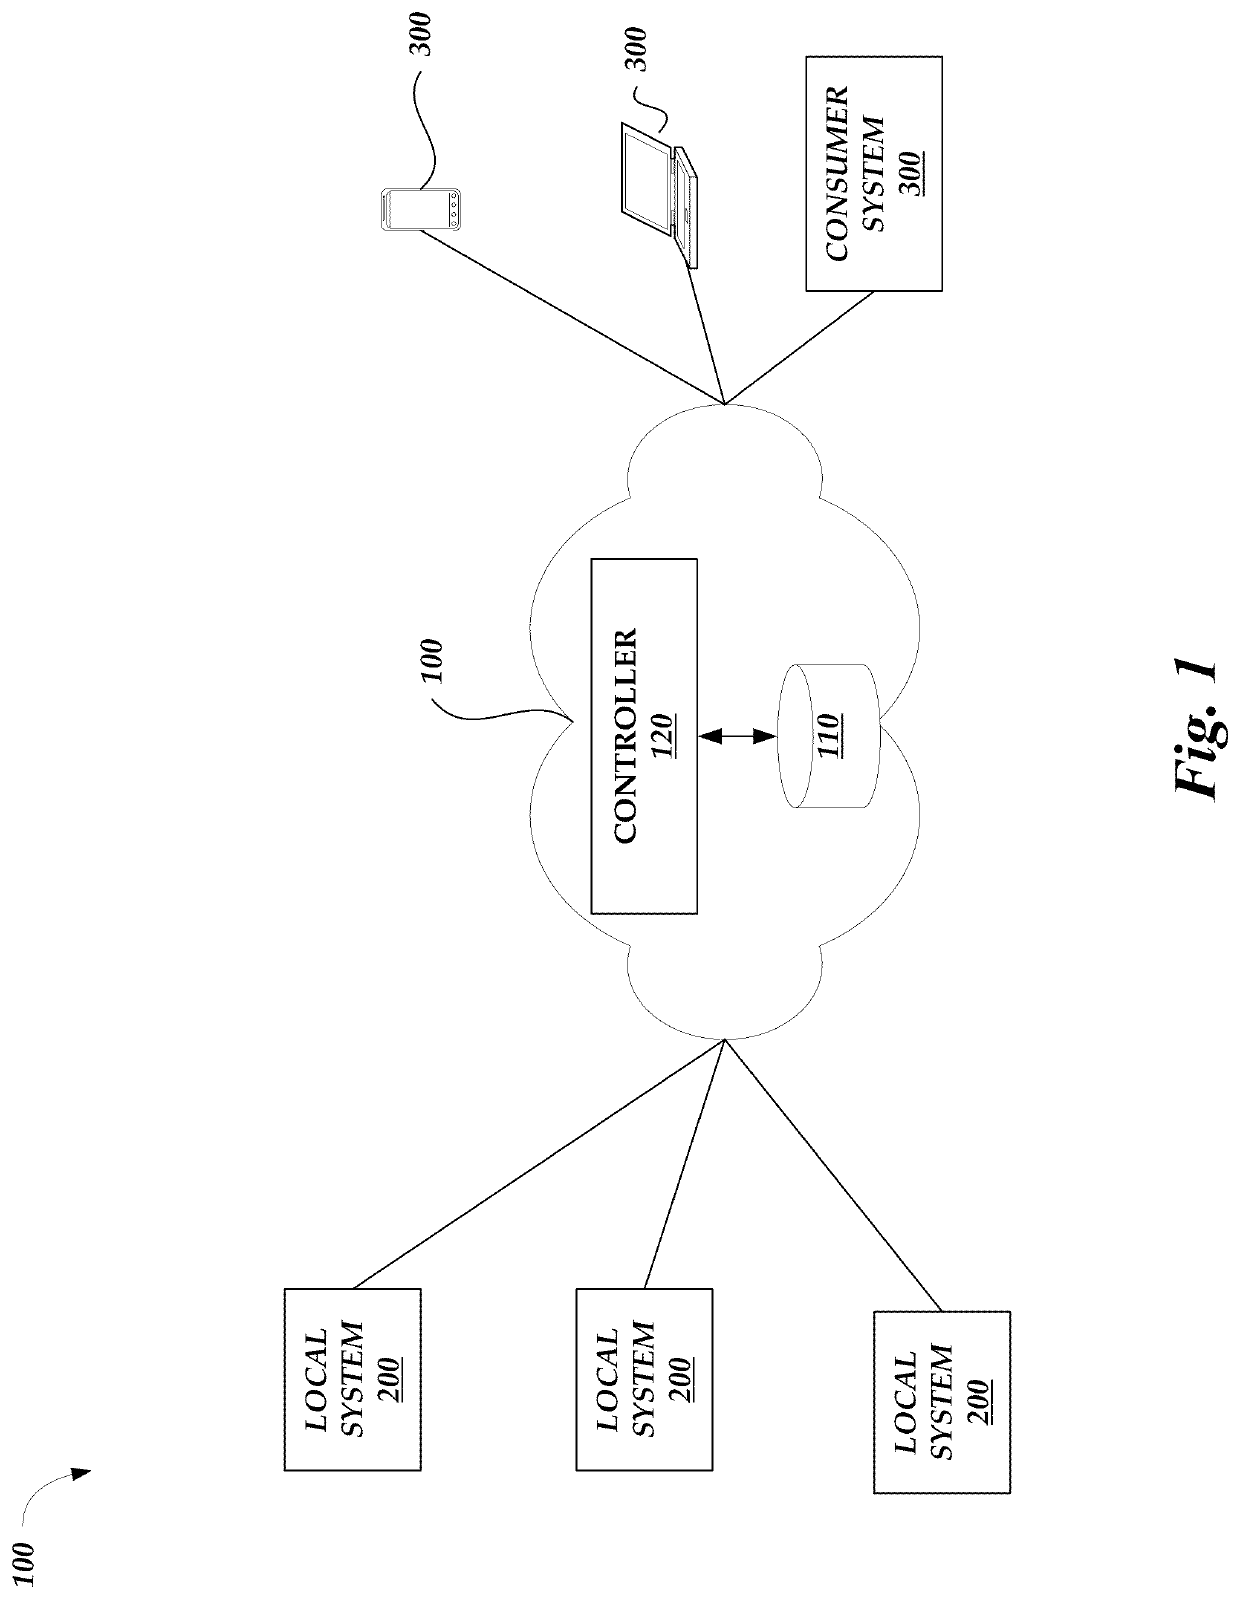 System for enabling cloud access to legacy application